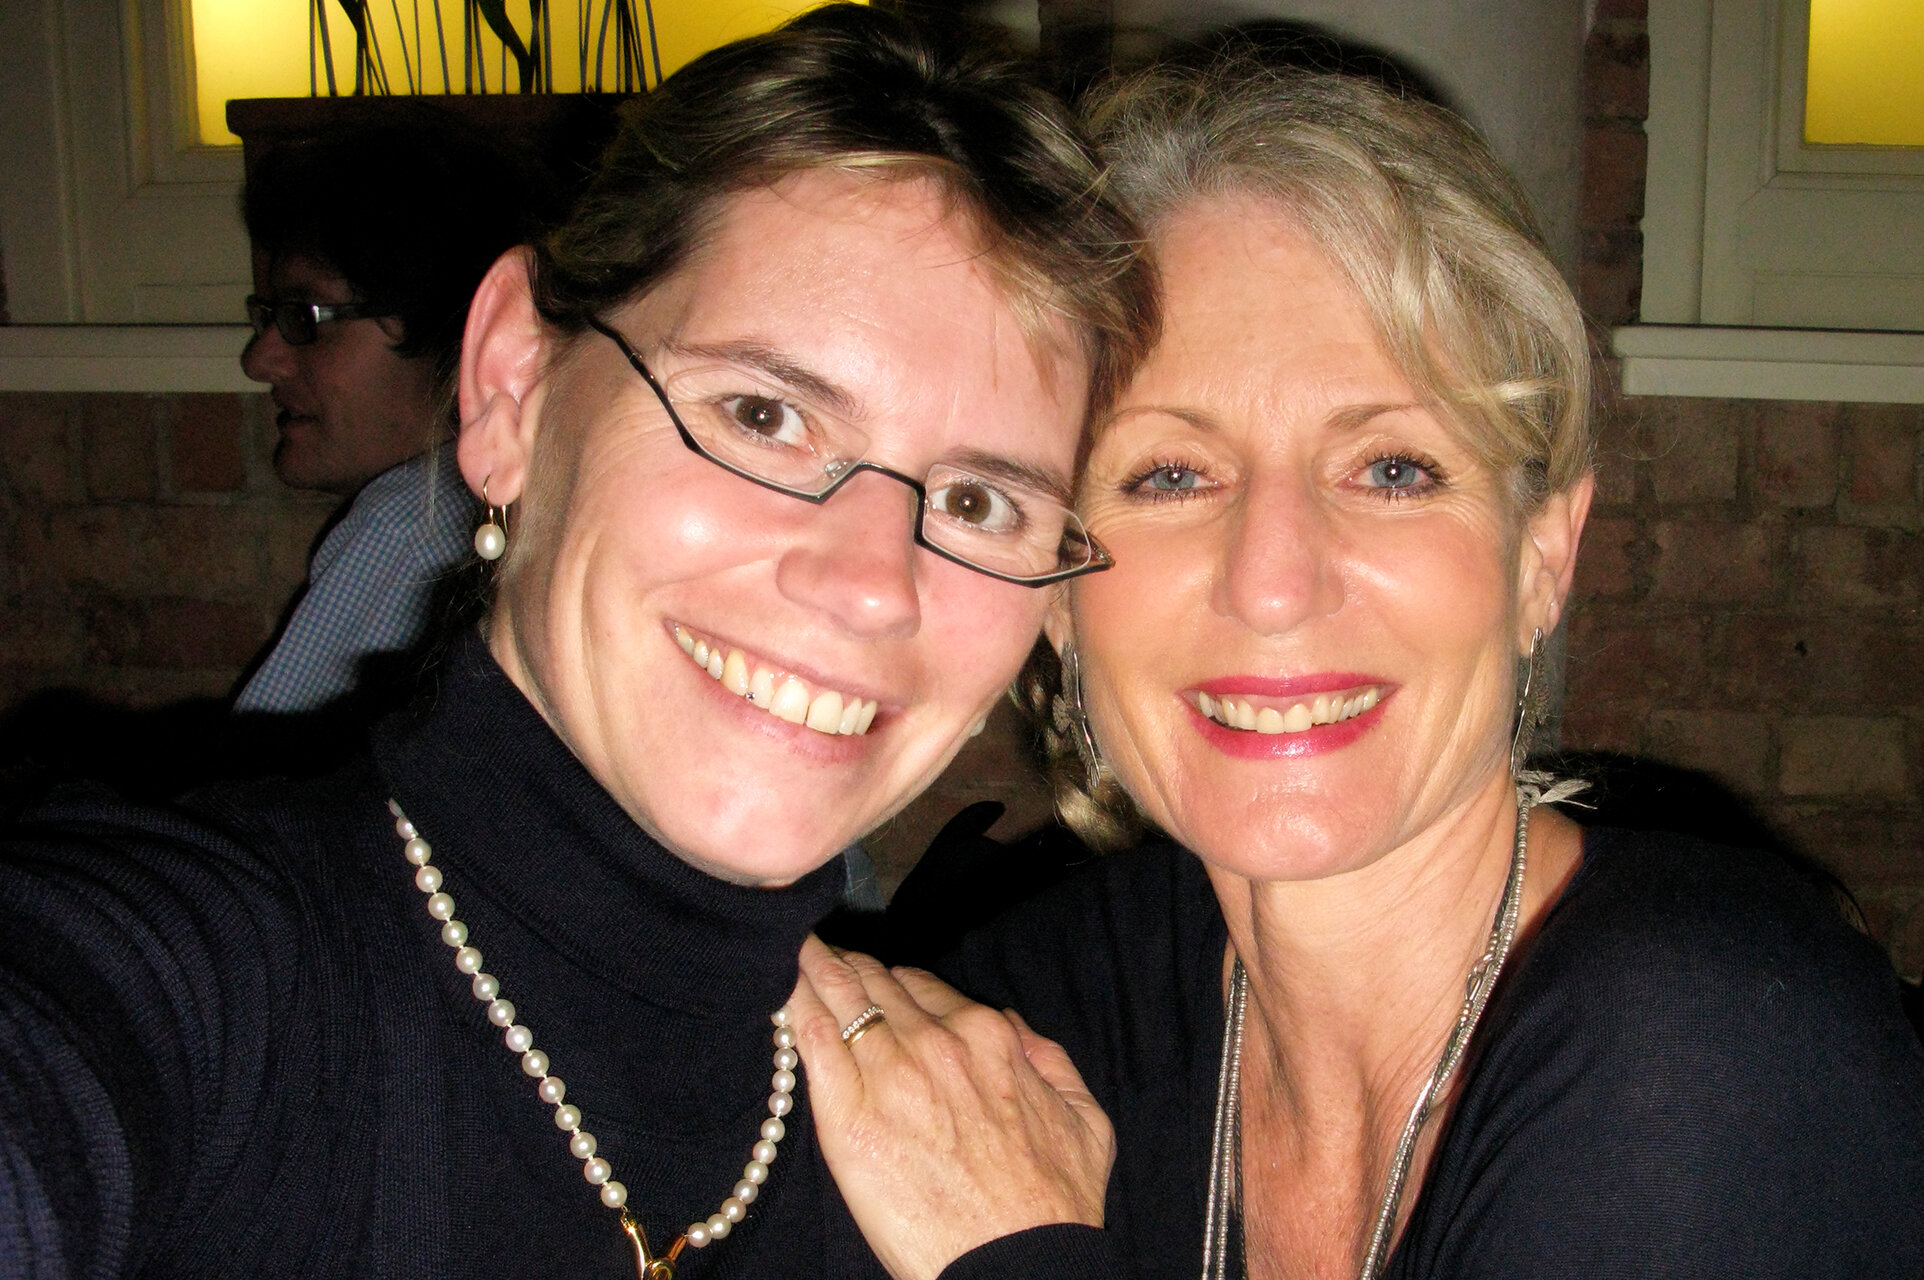  2009 - With friend Angie Scott in London for the BBC Wildlife Photographer of the year awards ceremony.     